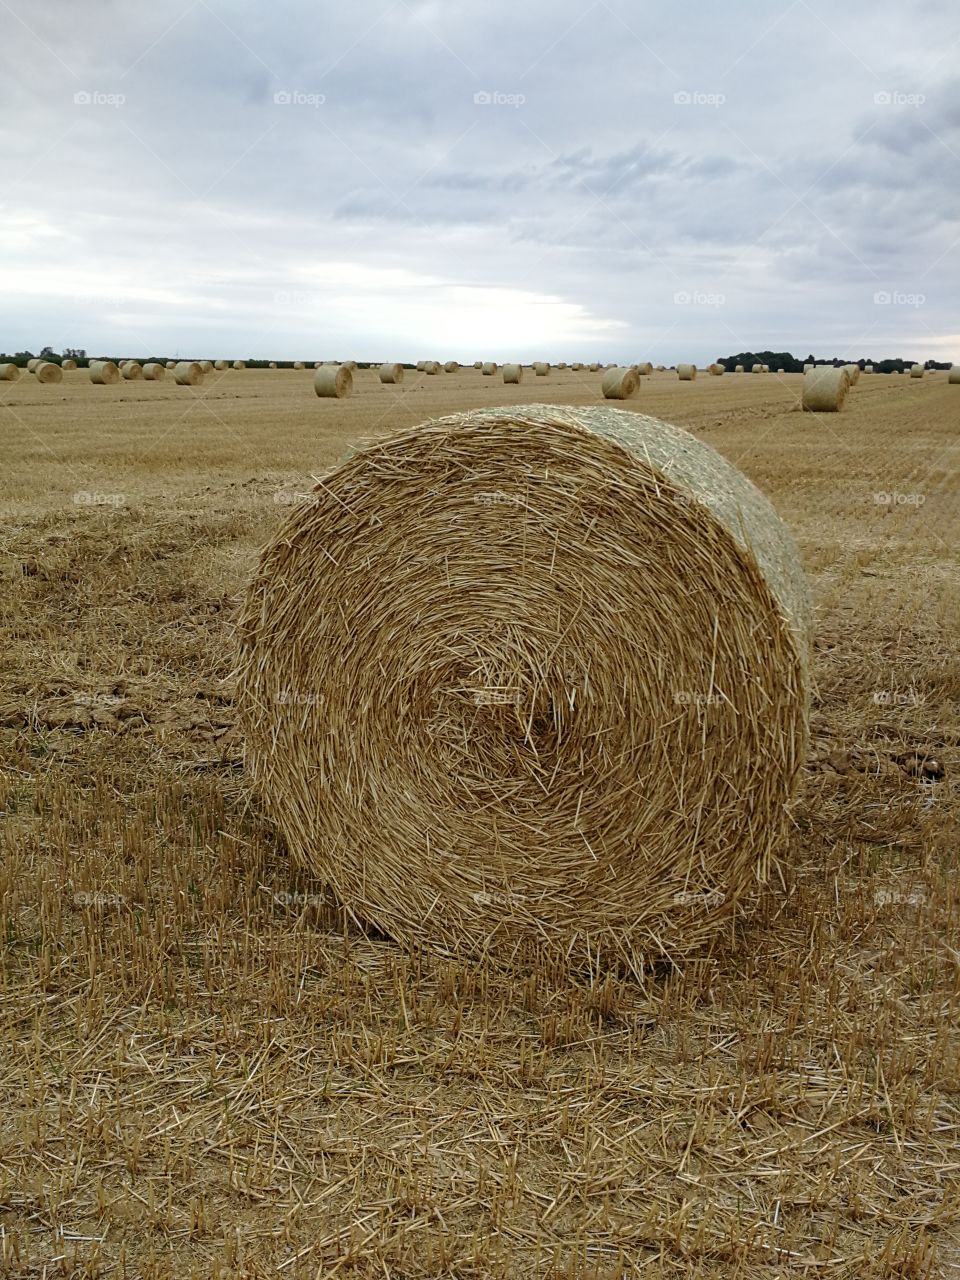 straw for animal feed during the winter